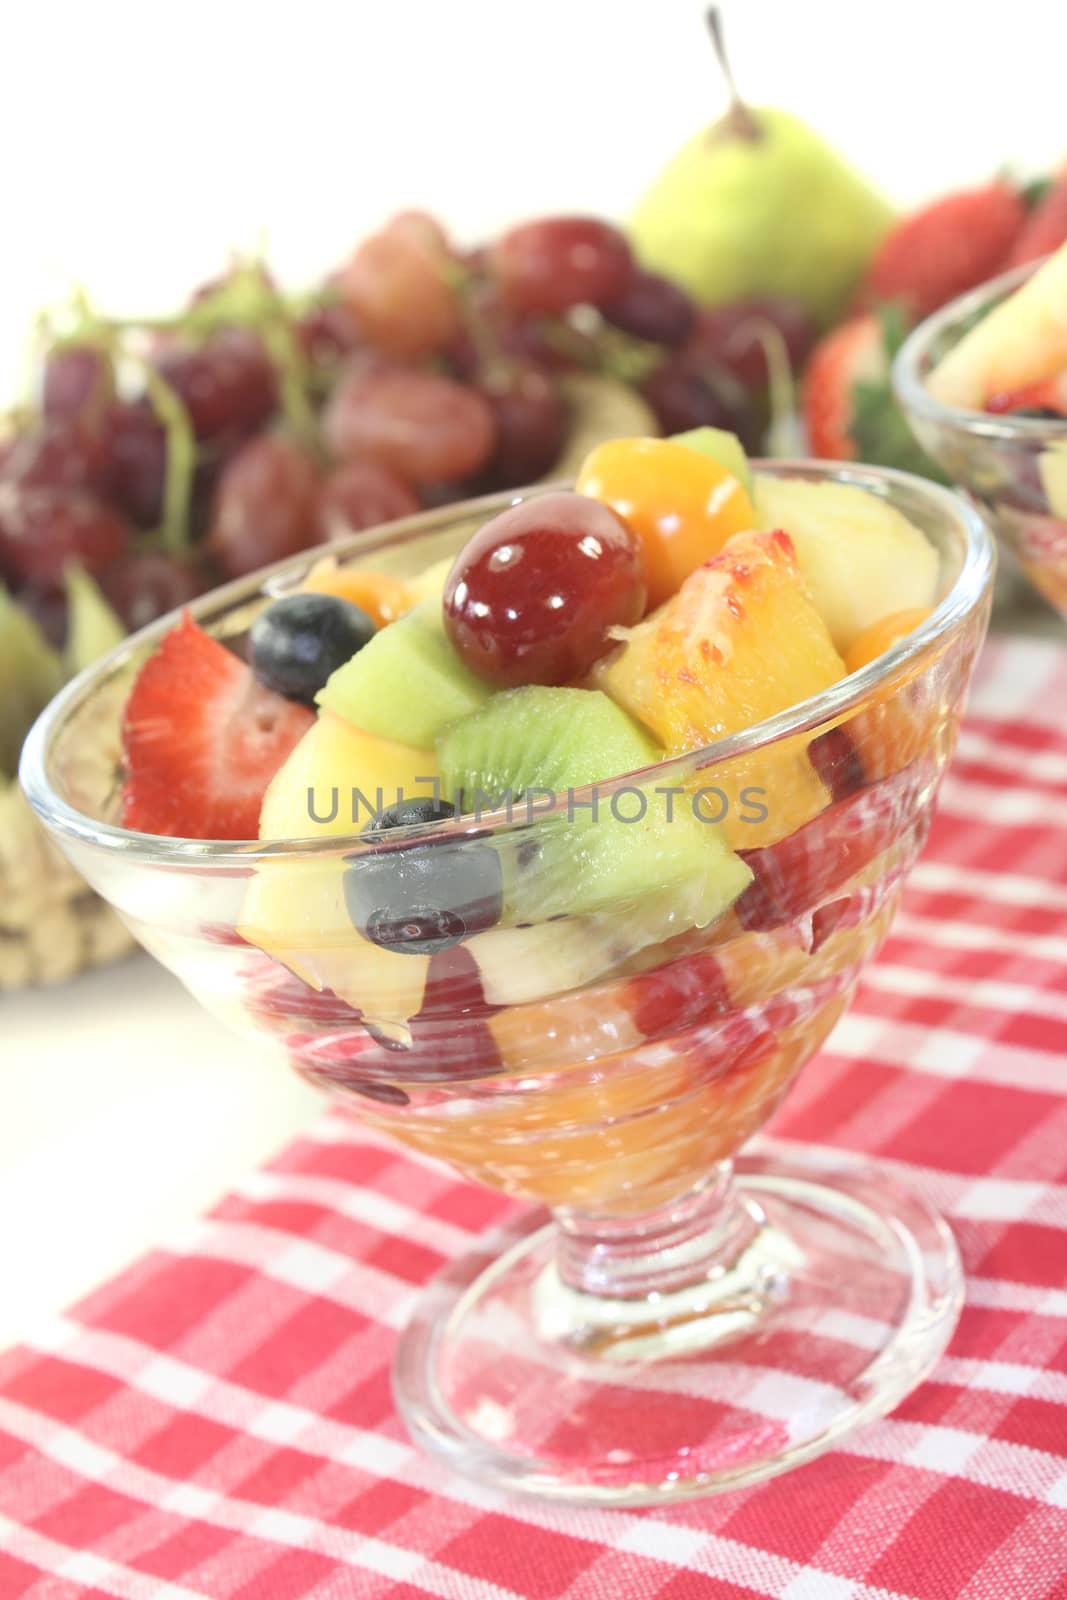 Fruit salad on a checkered napkin by discovery